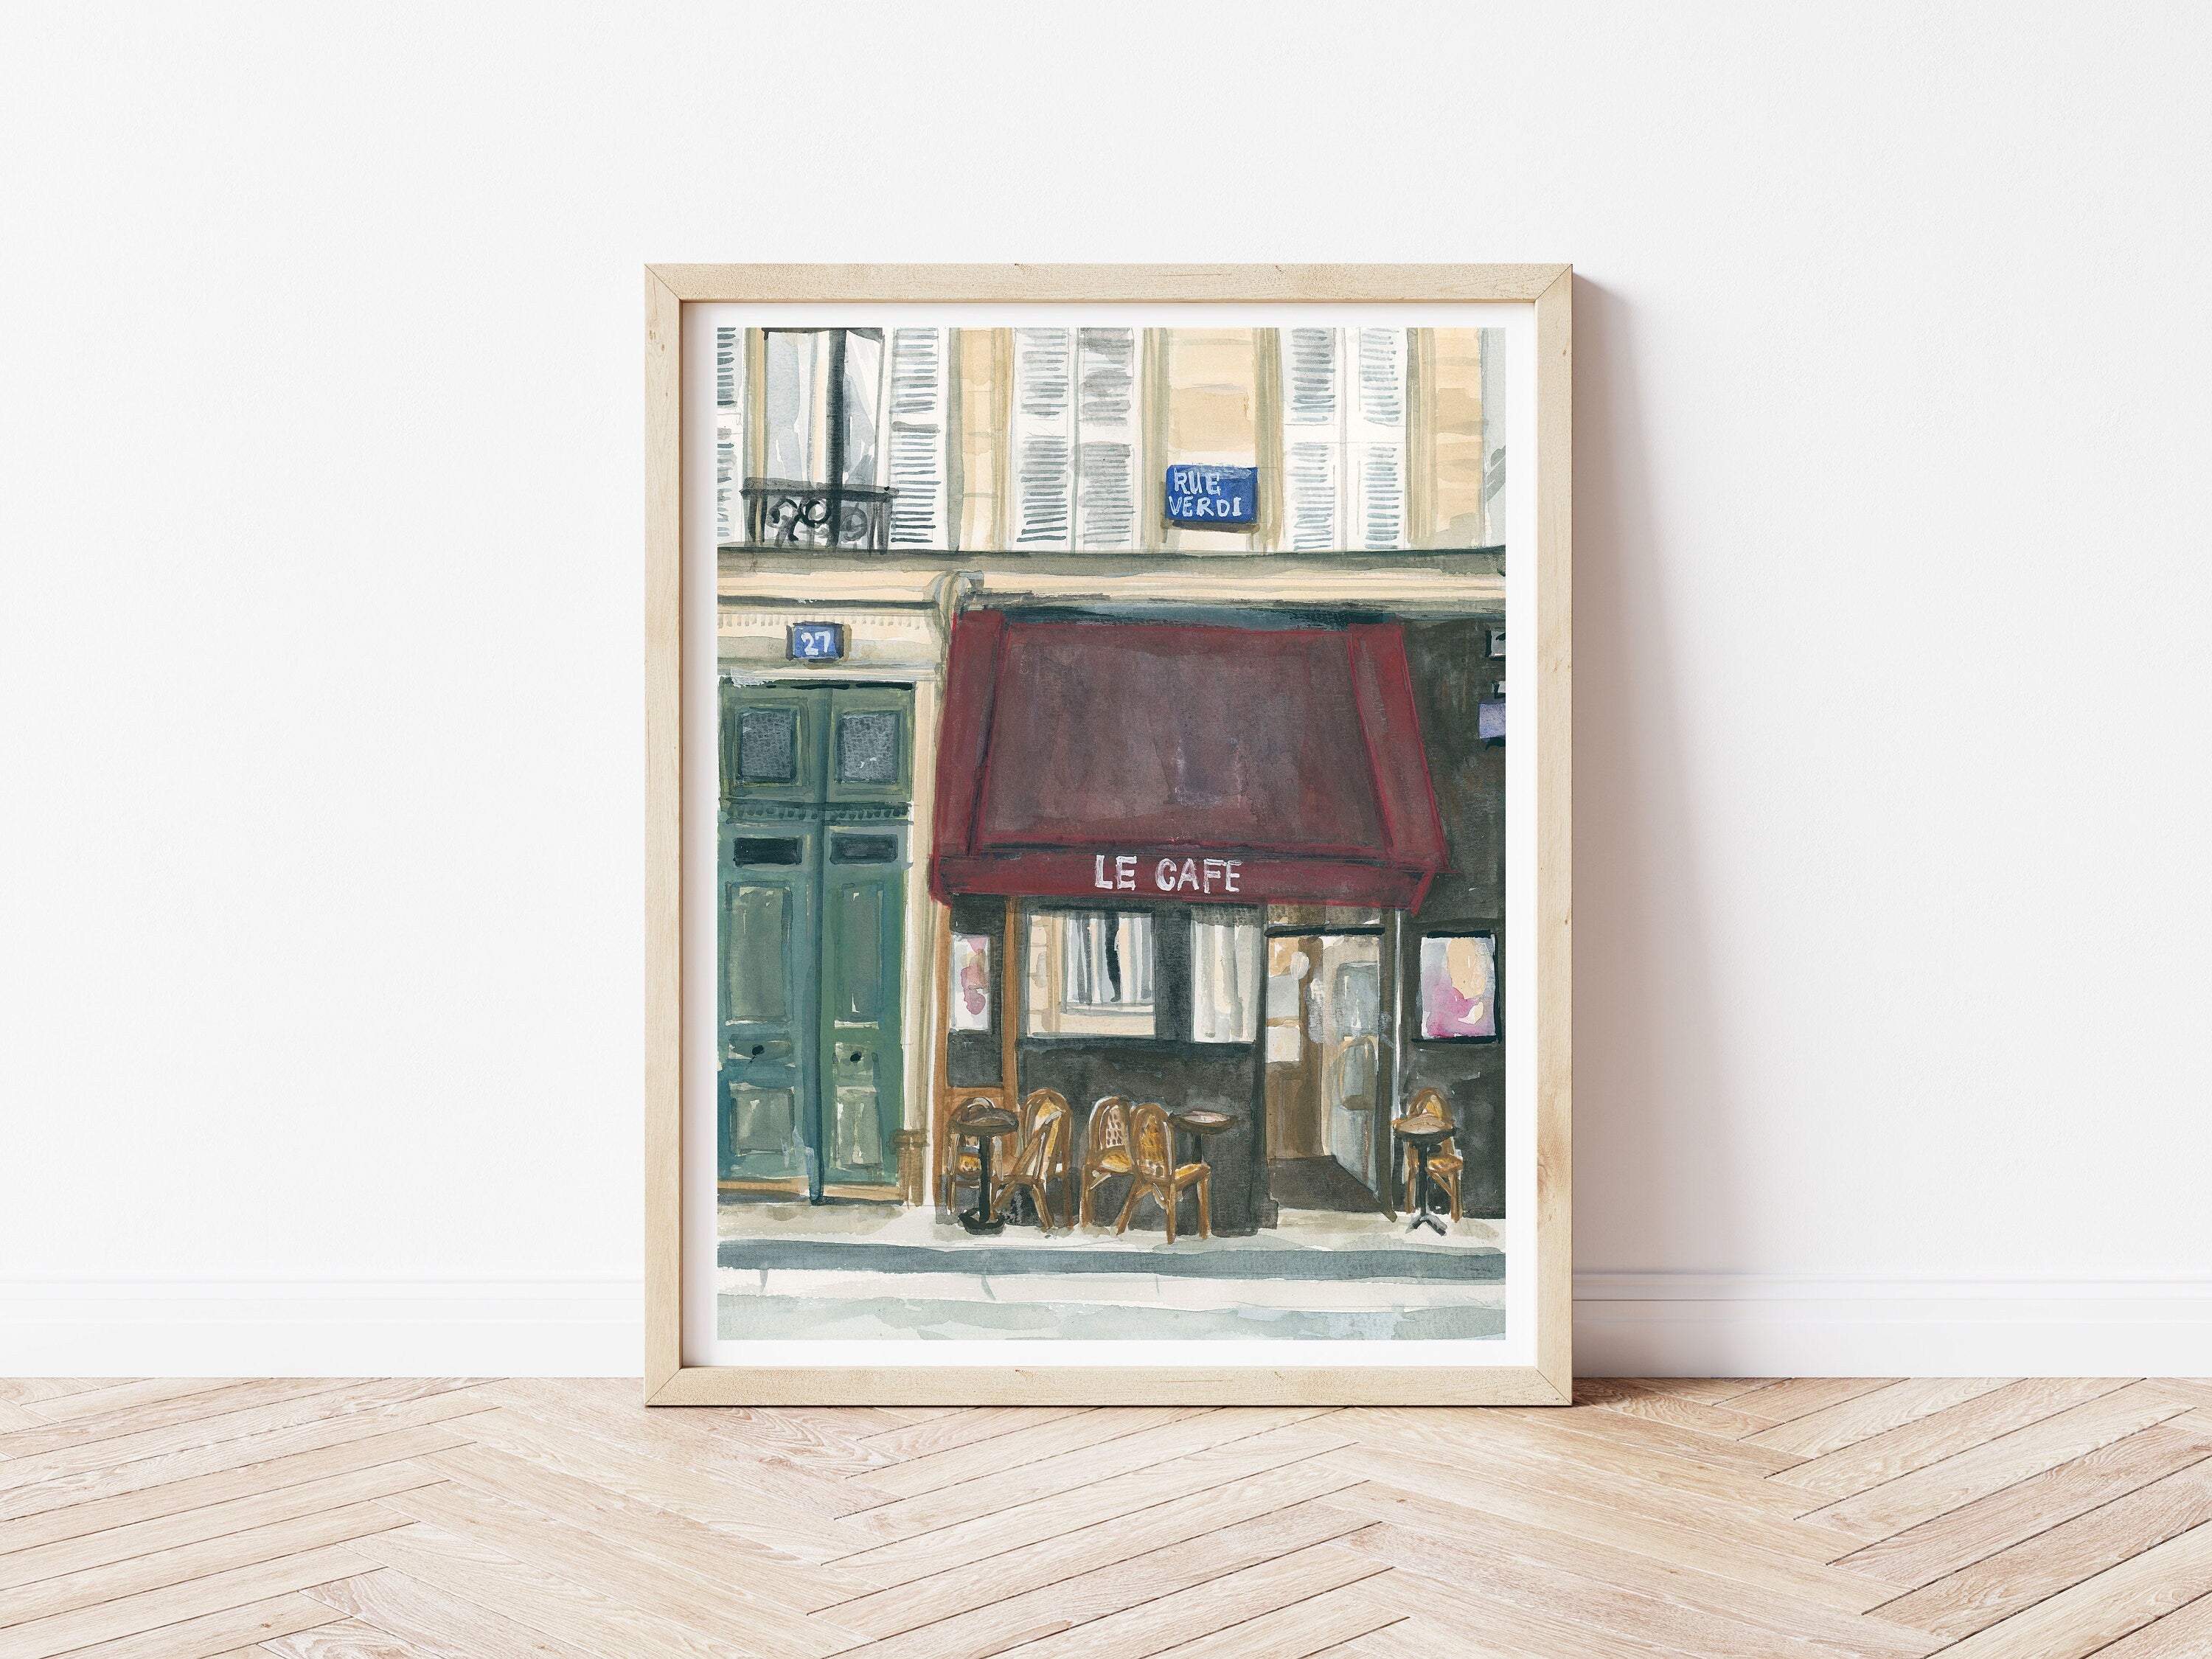 Paris cafe print of painting by Medjool Studio. Print of original gouache painting of the front of a small cafe in Paris, France featuring a burgundy awning, small tables and chairs out front.